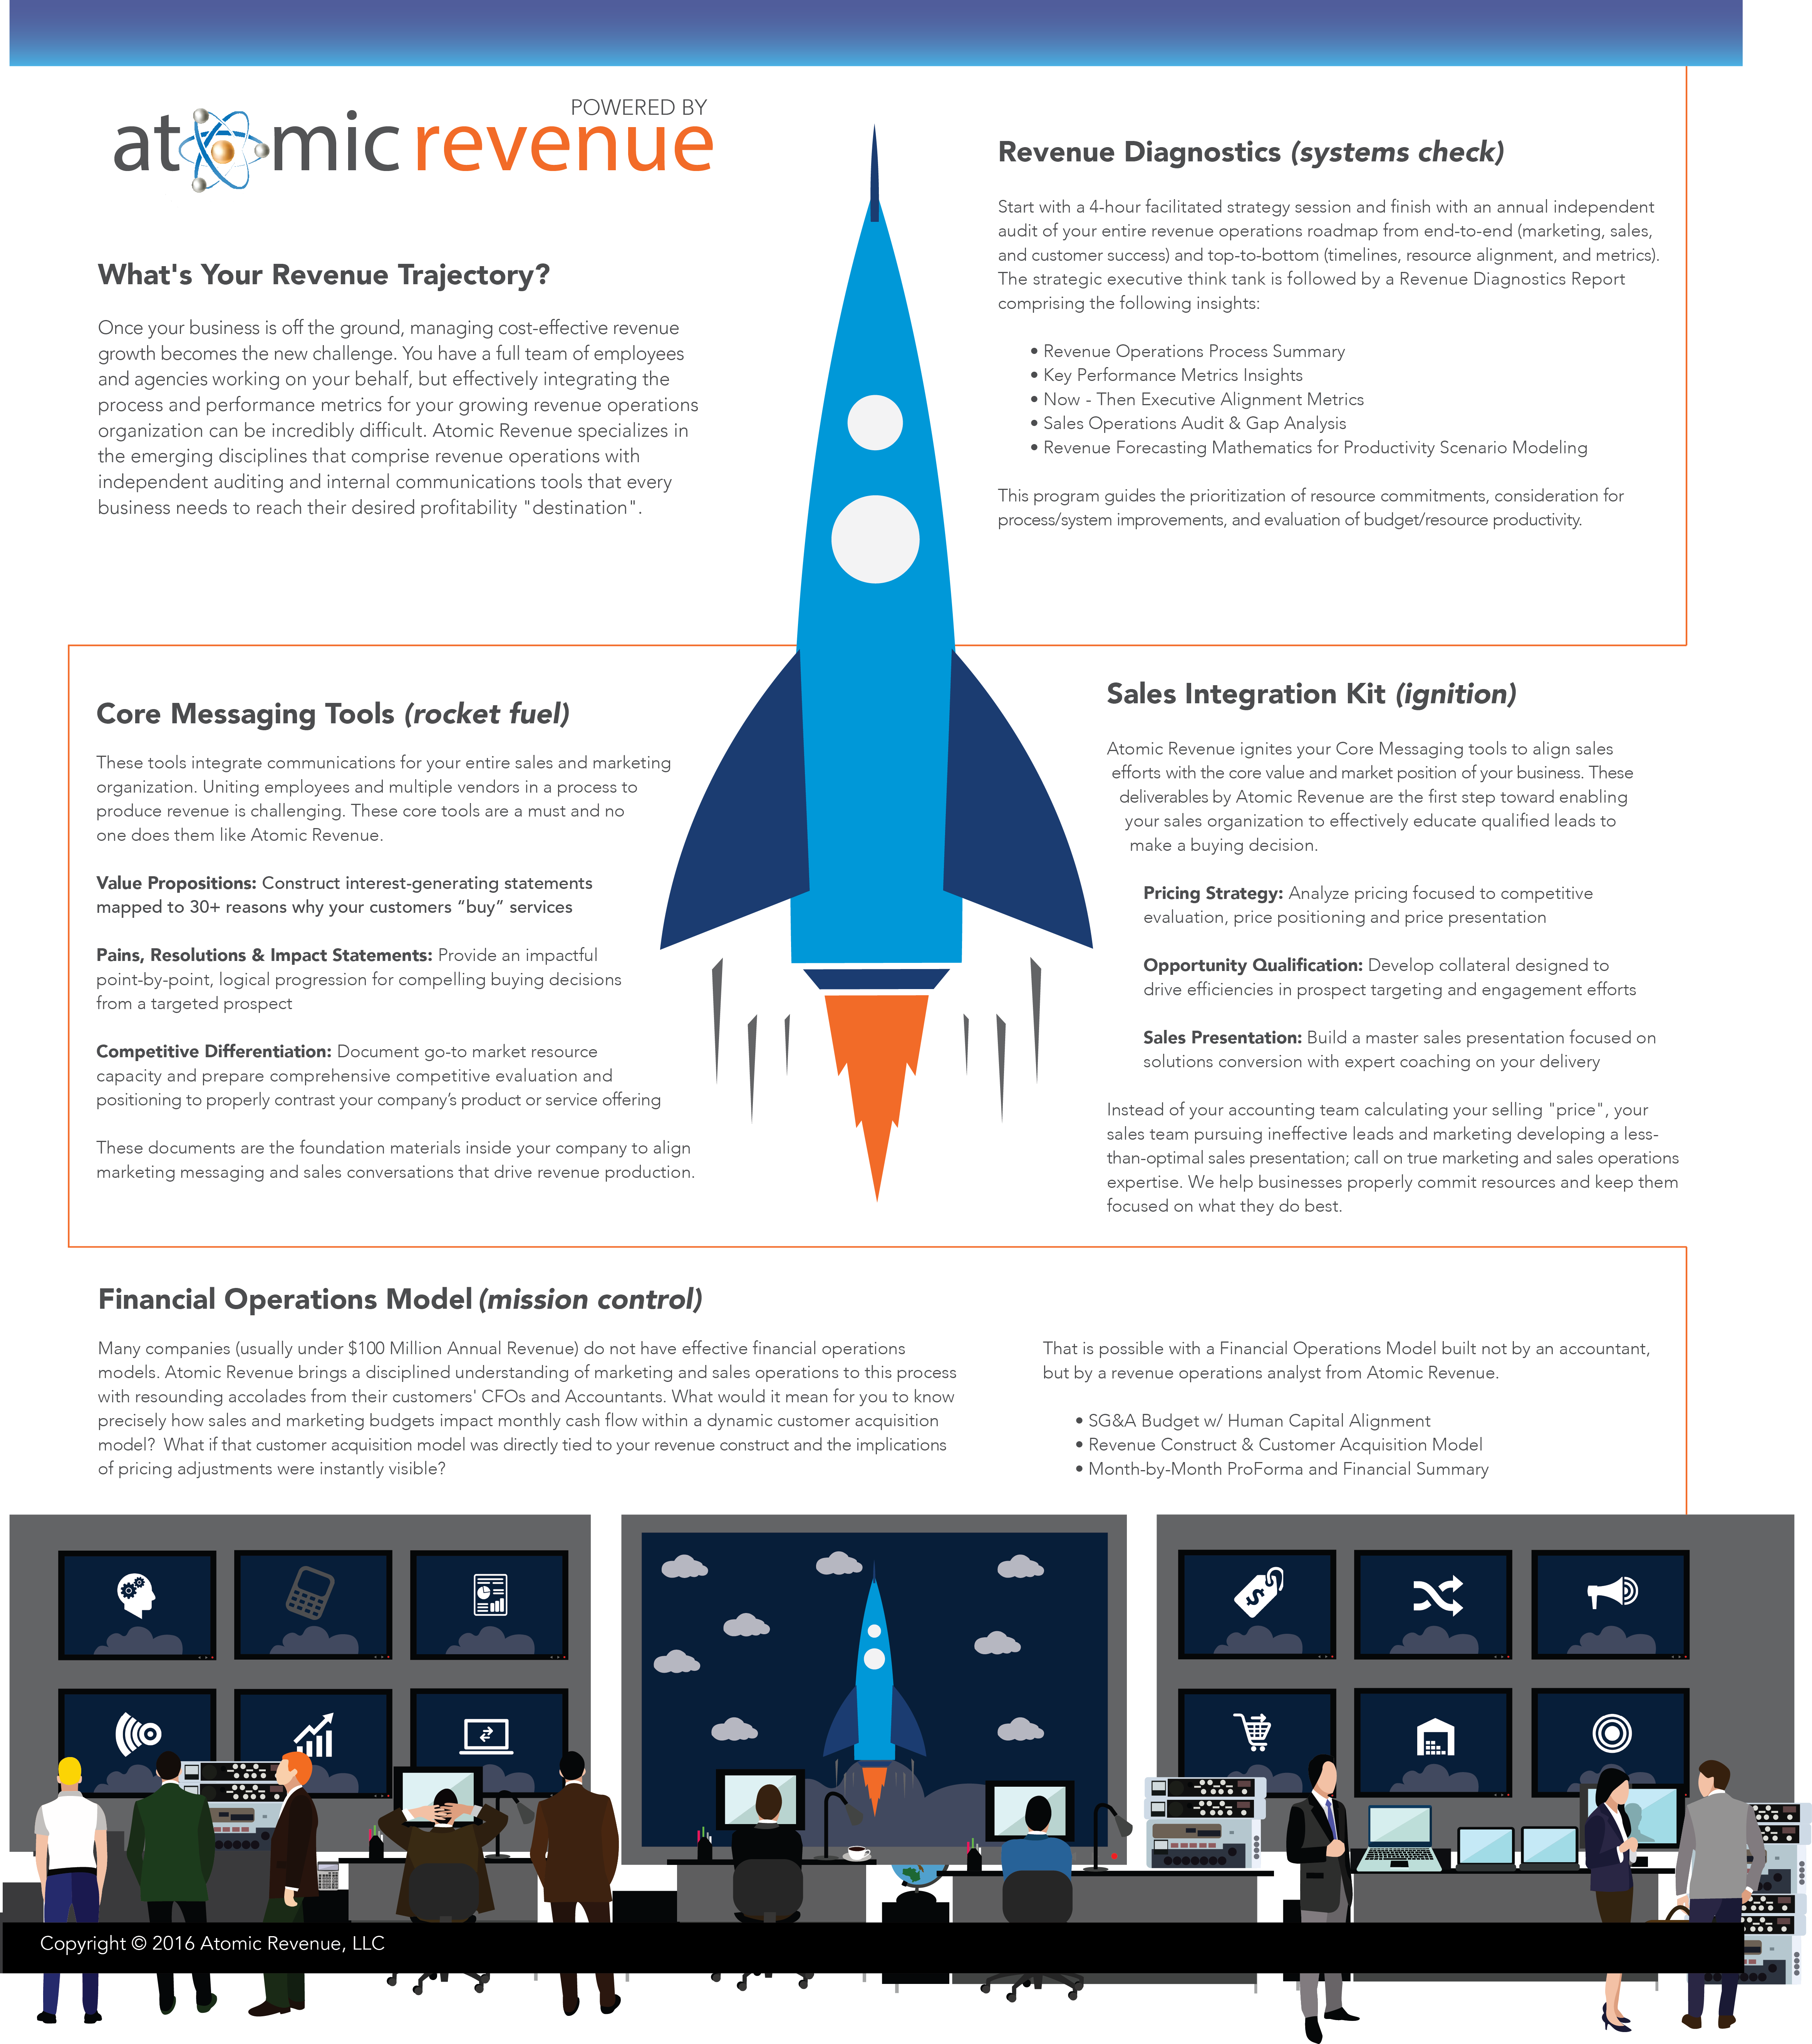 How Atomic Revenue uses graphic design to grow your business